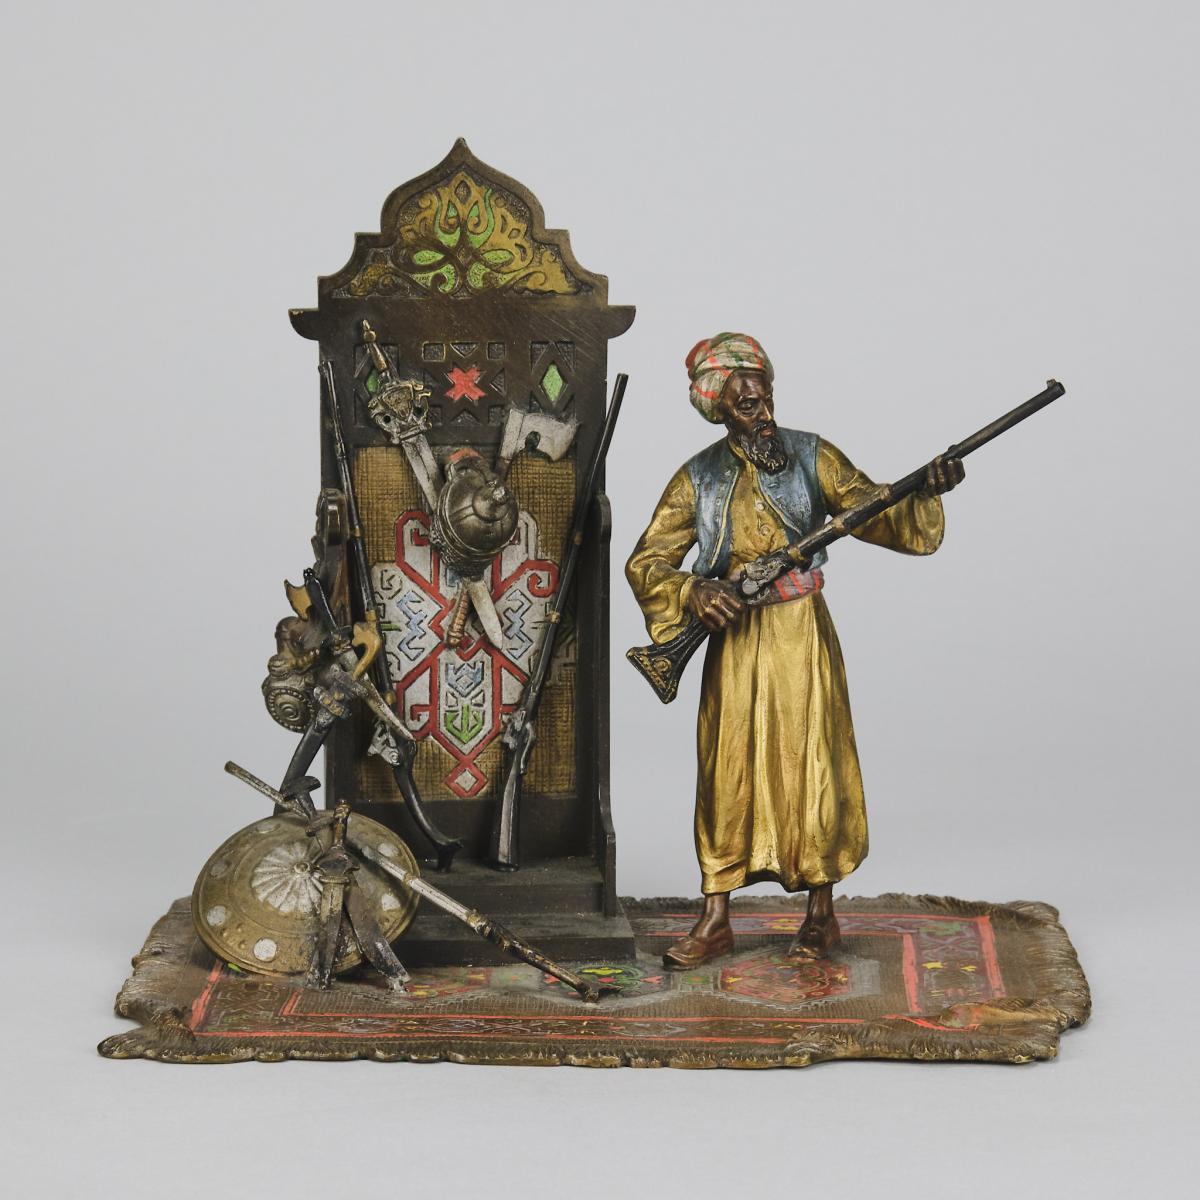 Early 20th Century Cold Painted Bronze entitled "Arms Dealer" by Franz Bergman